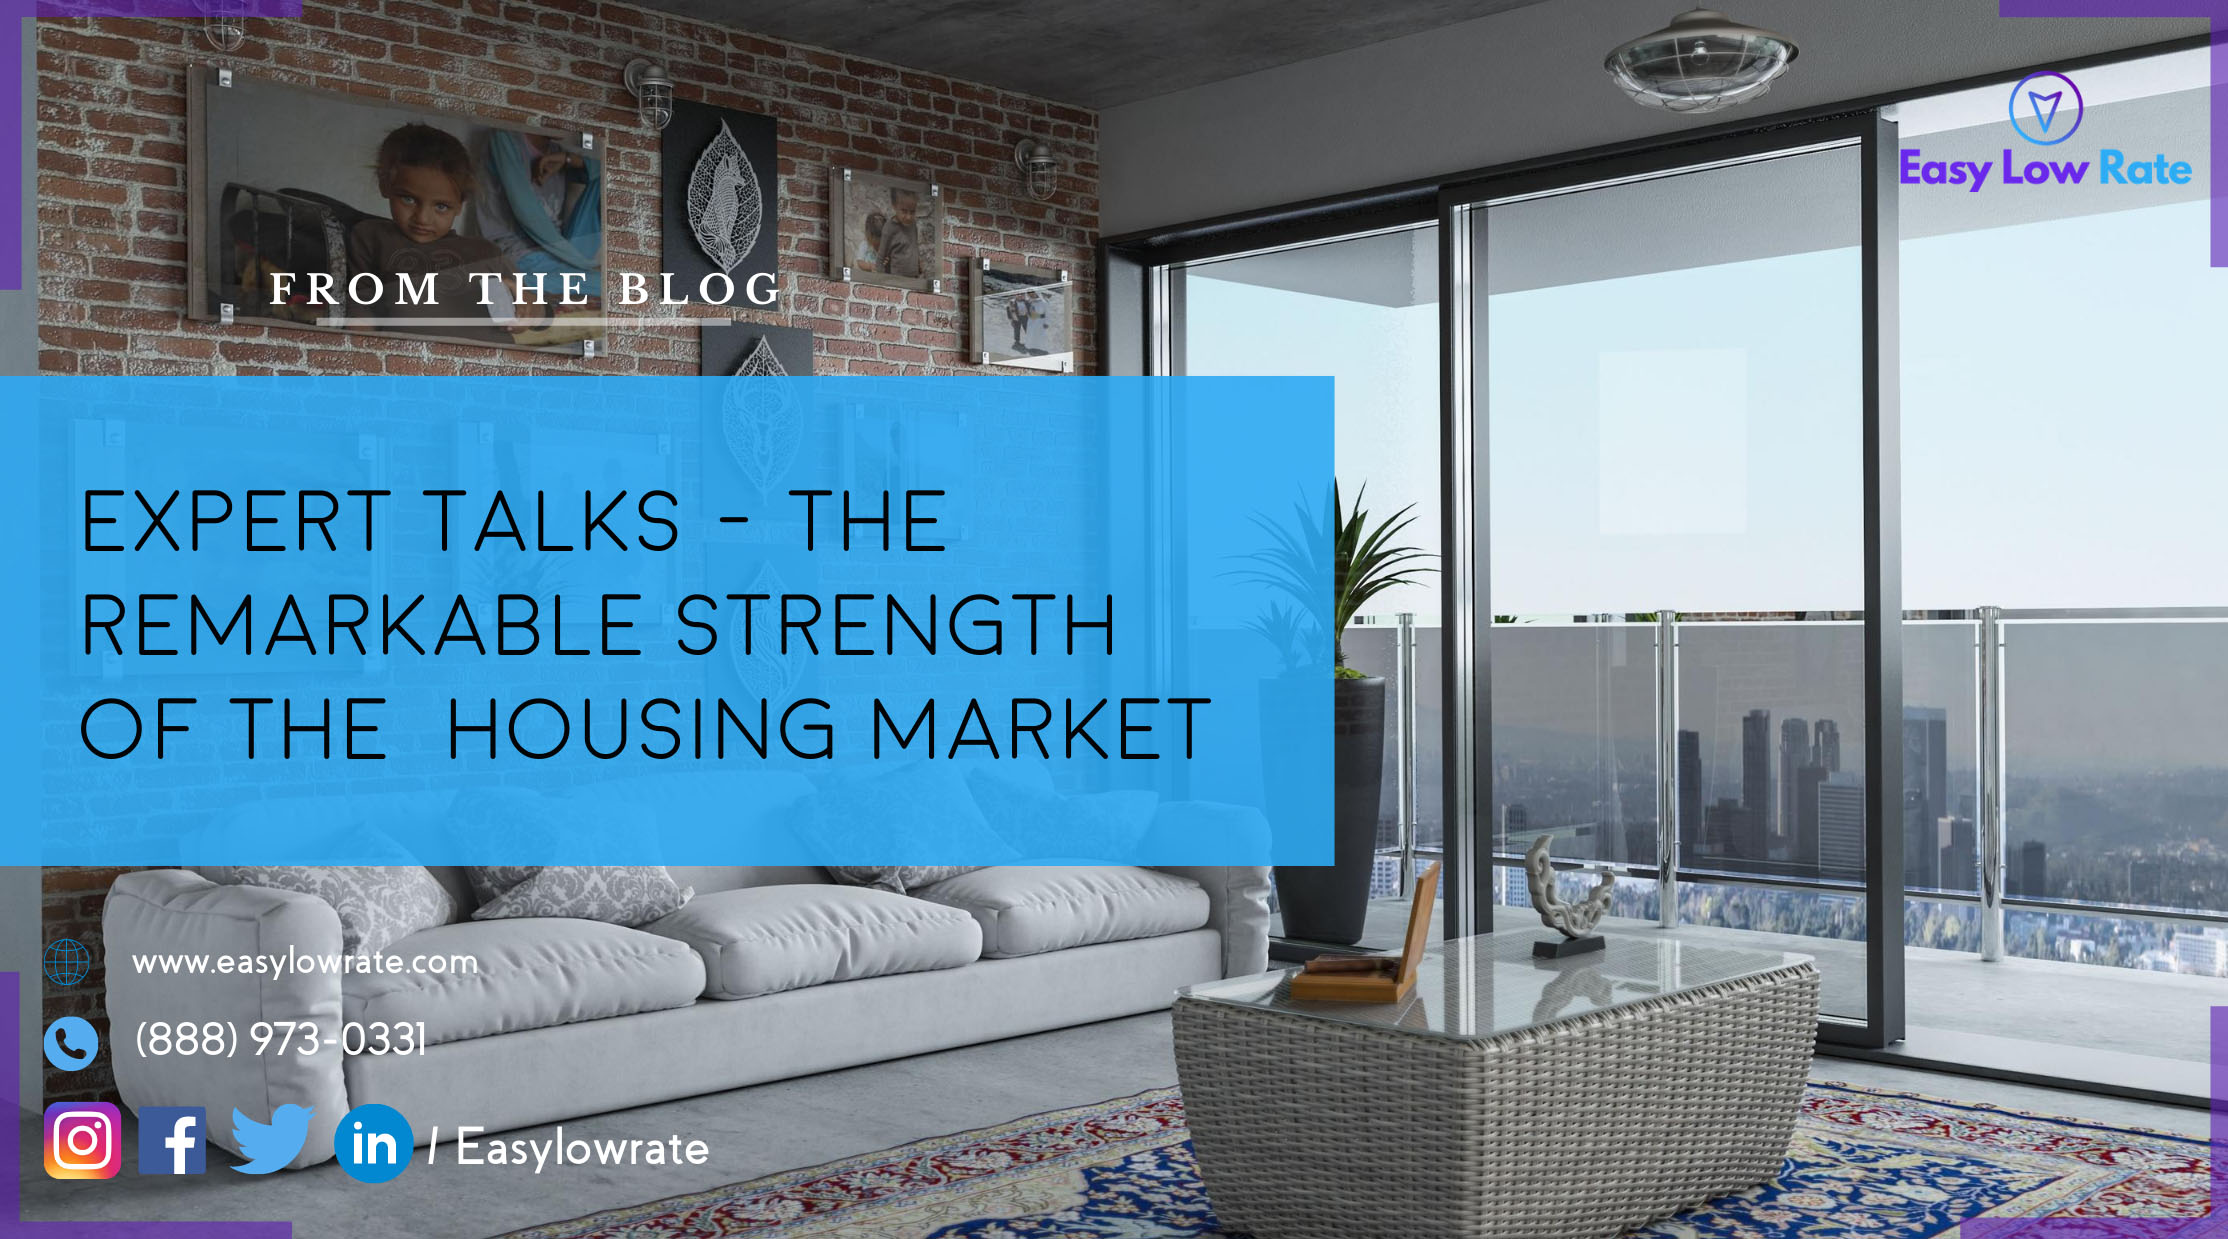 The remarkable strength of the housing market